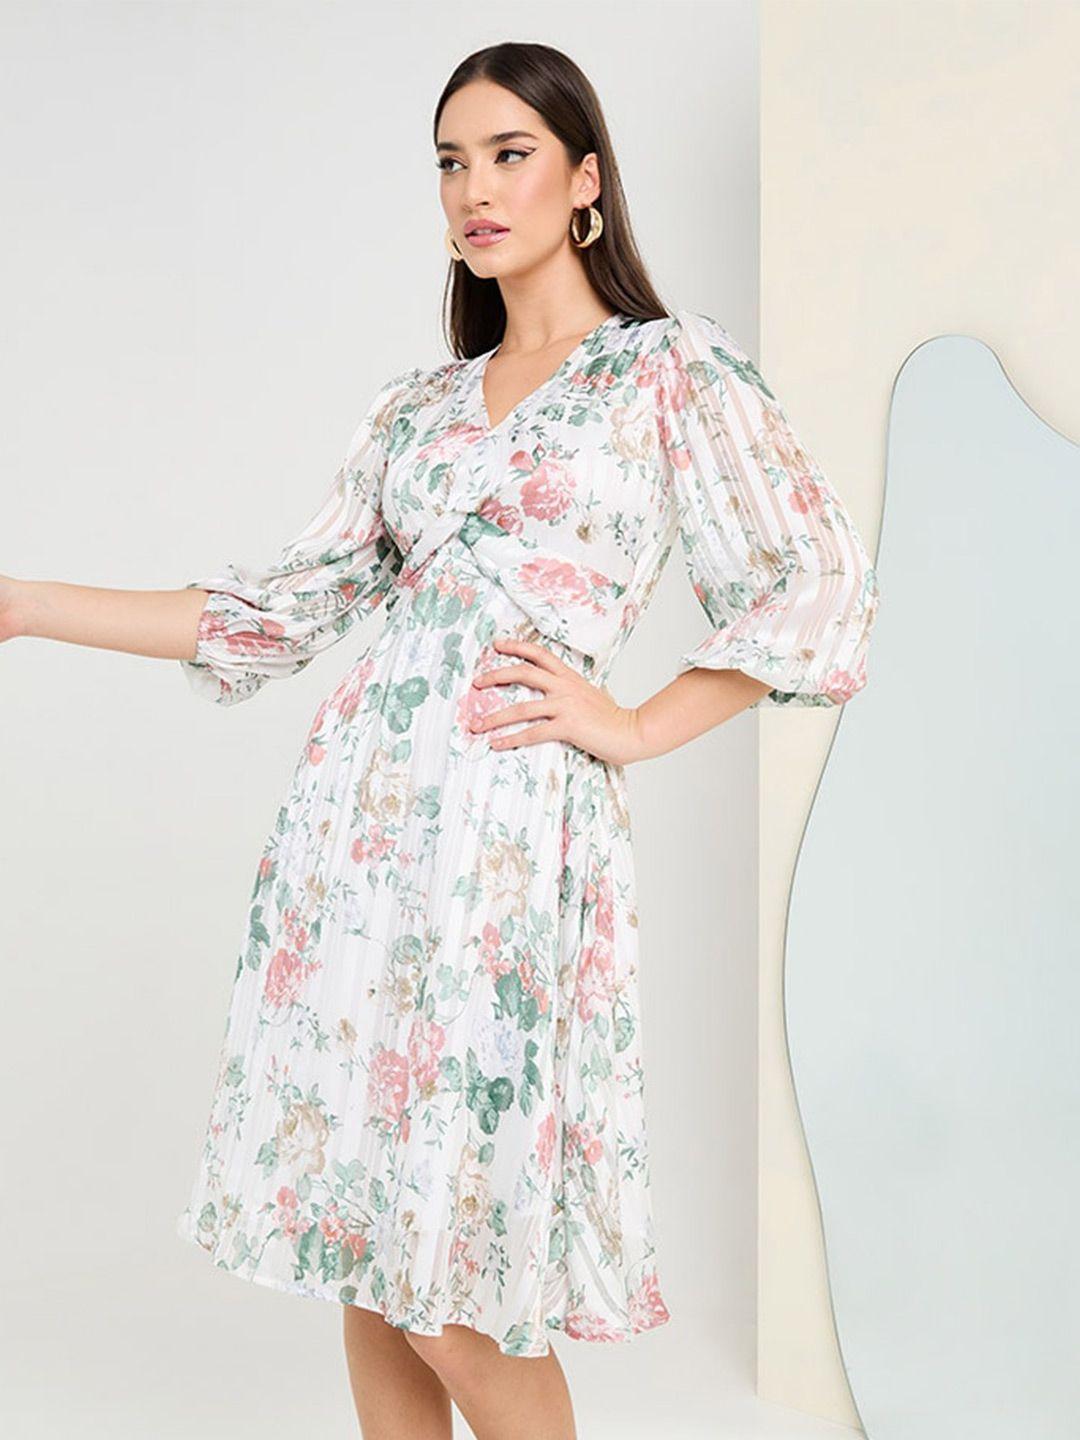 styli-floral-printed-a-line-dress